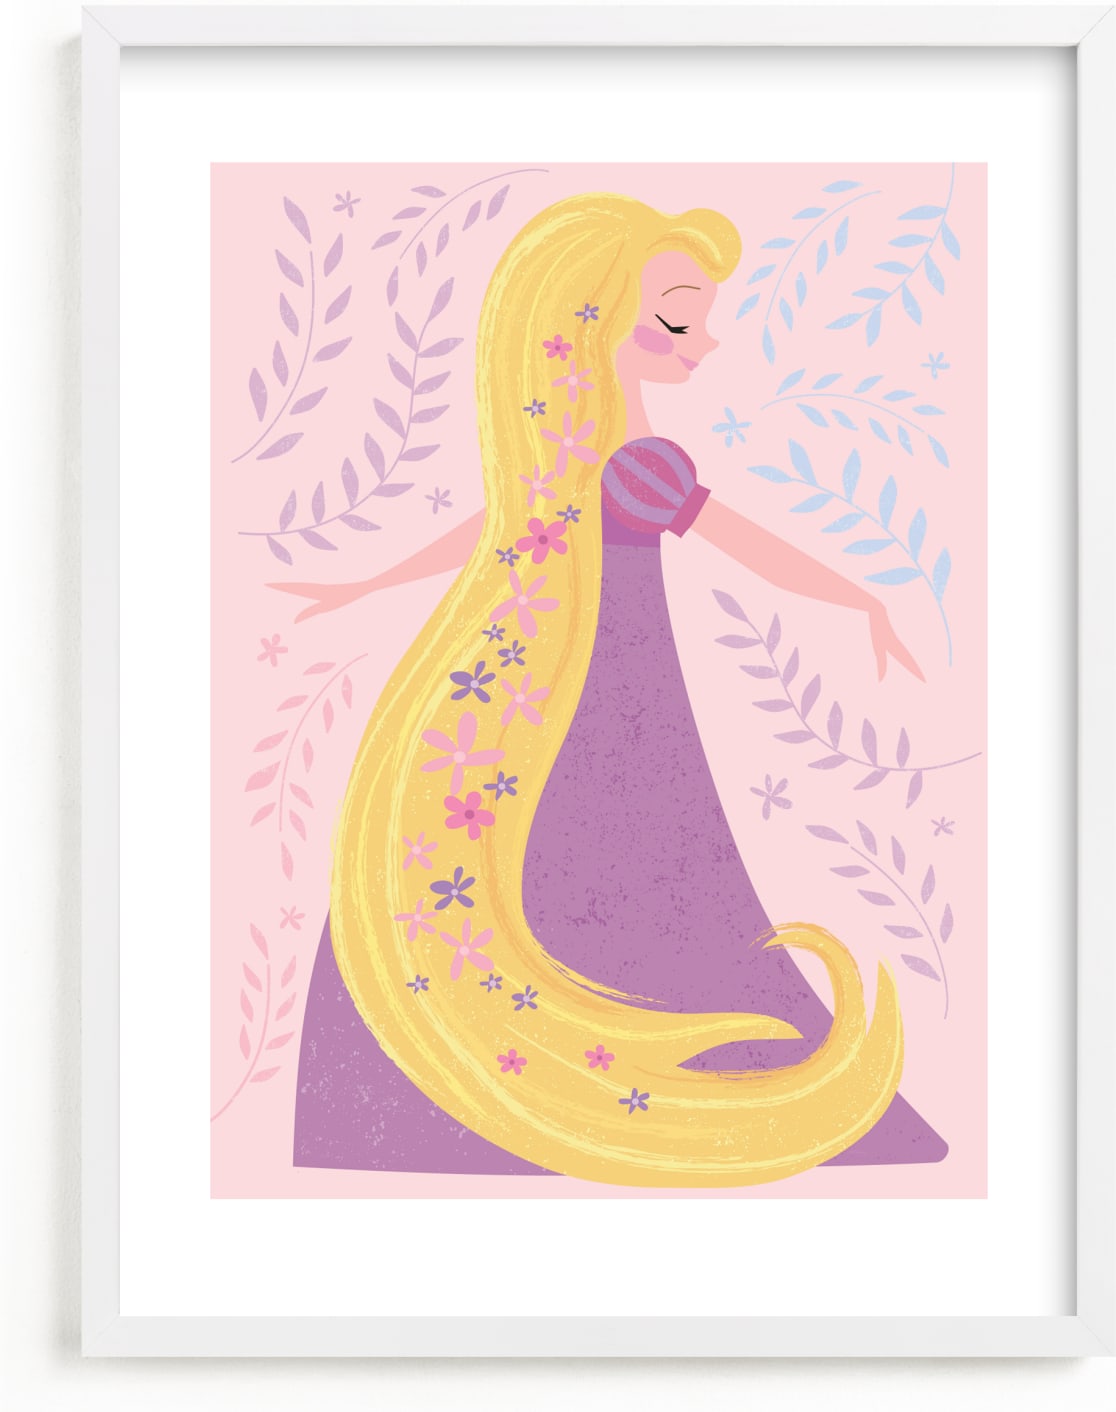 This is a purple disney art by Angela Thompson called Disney Dreaming Rapunzel.